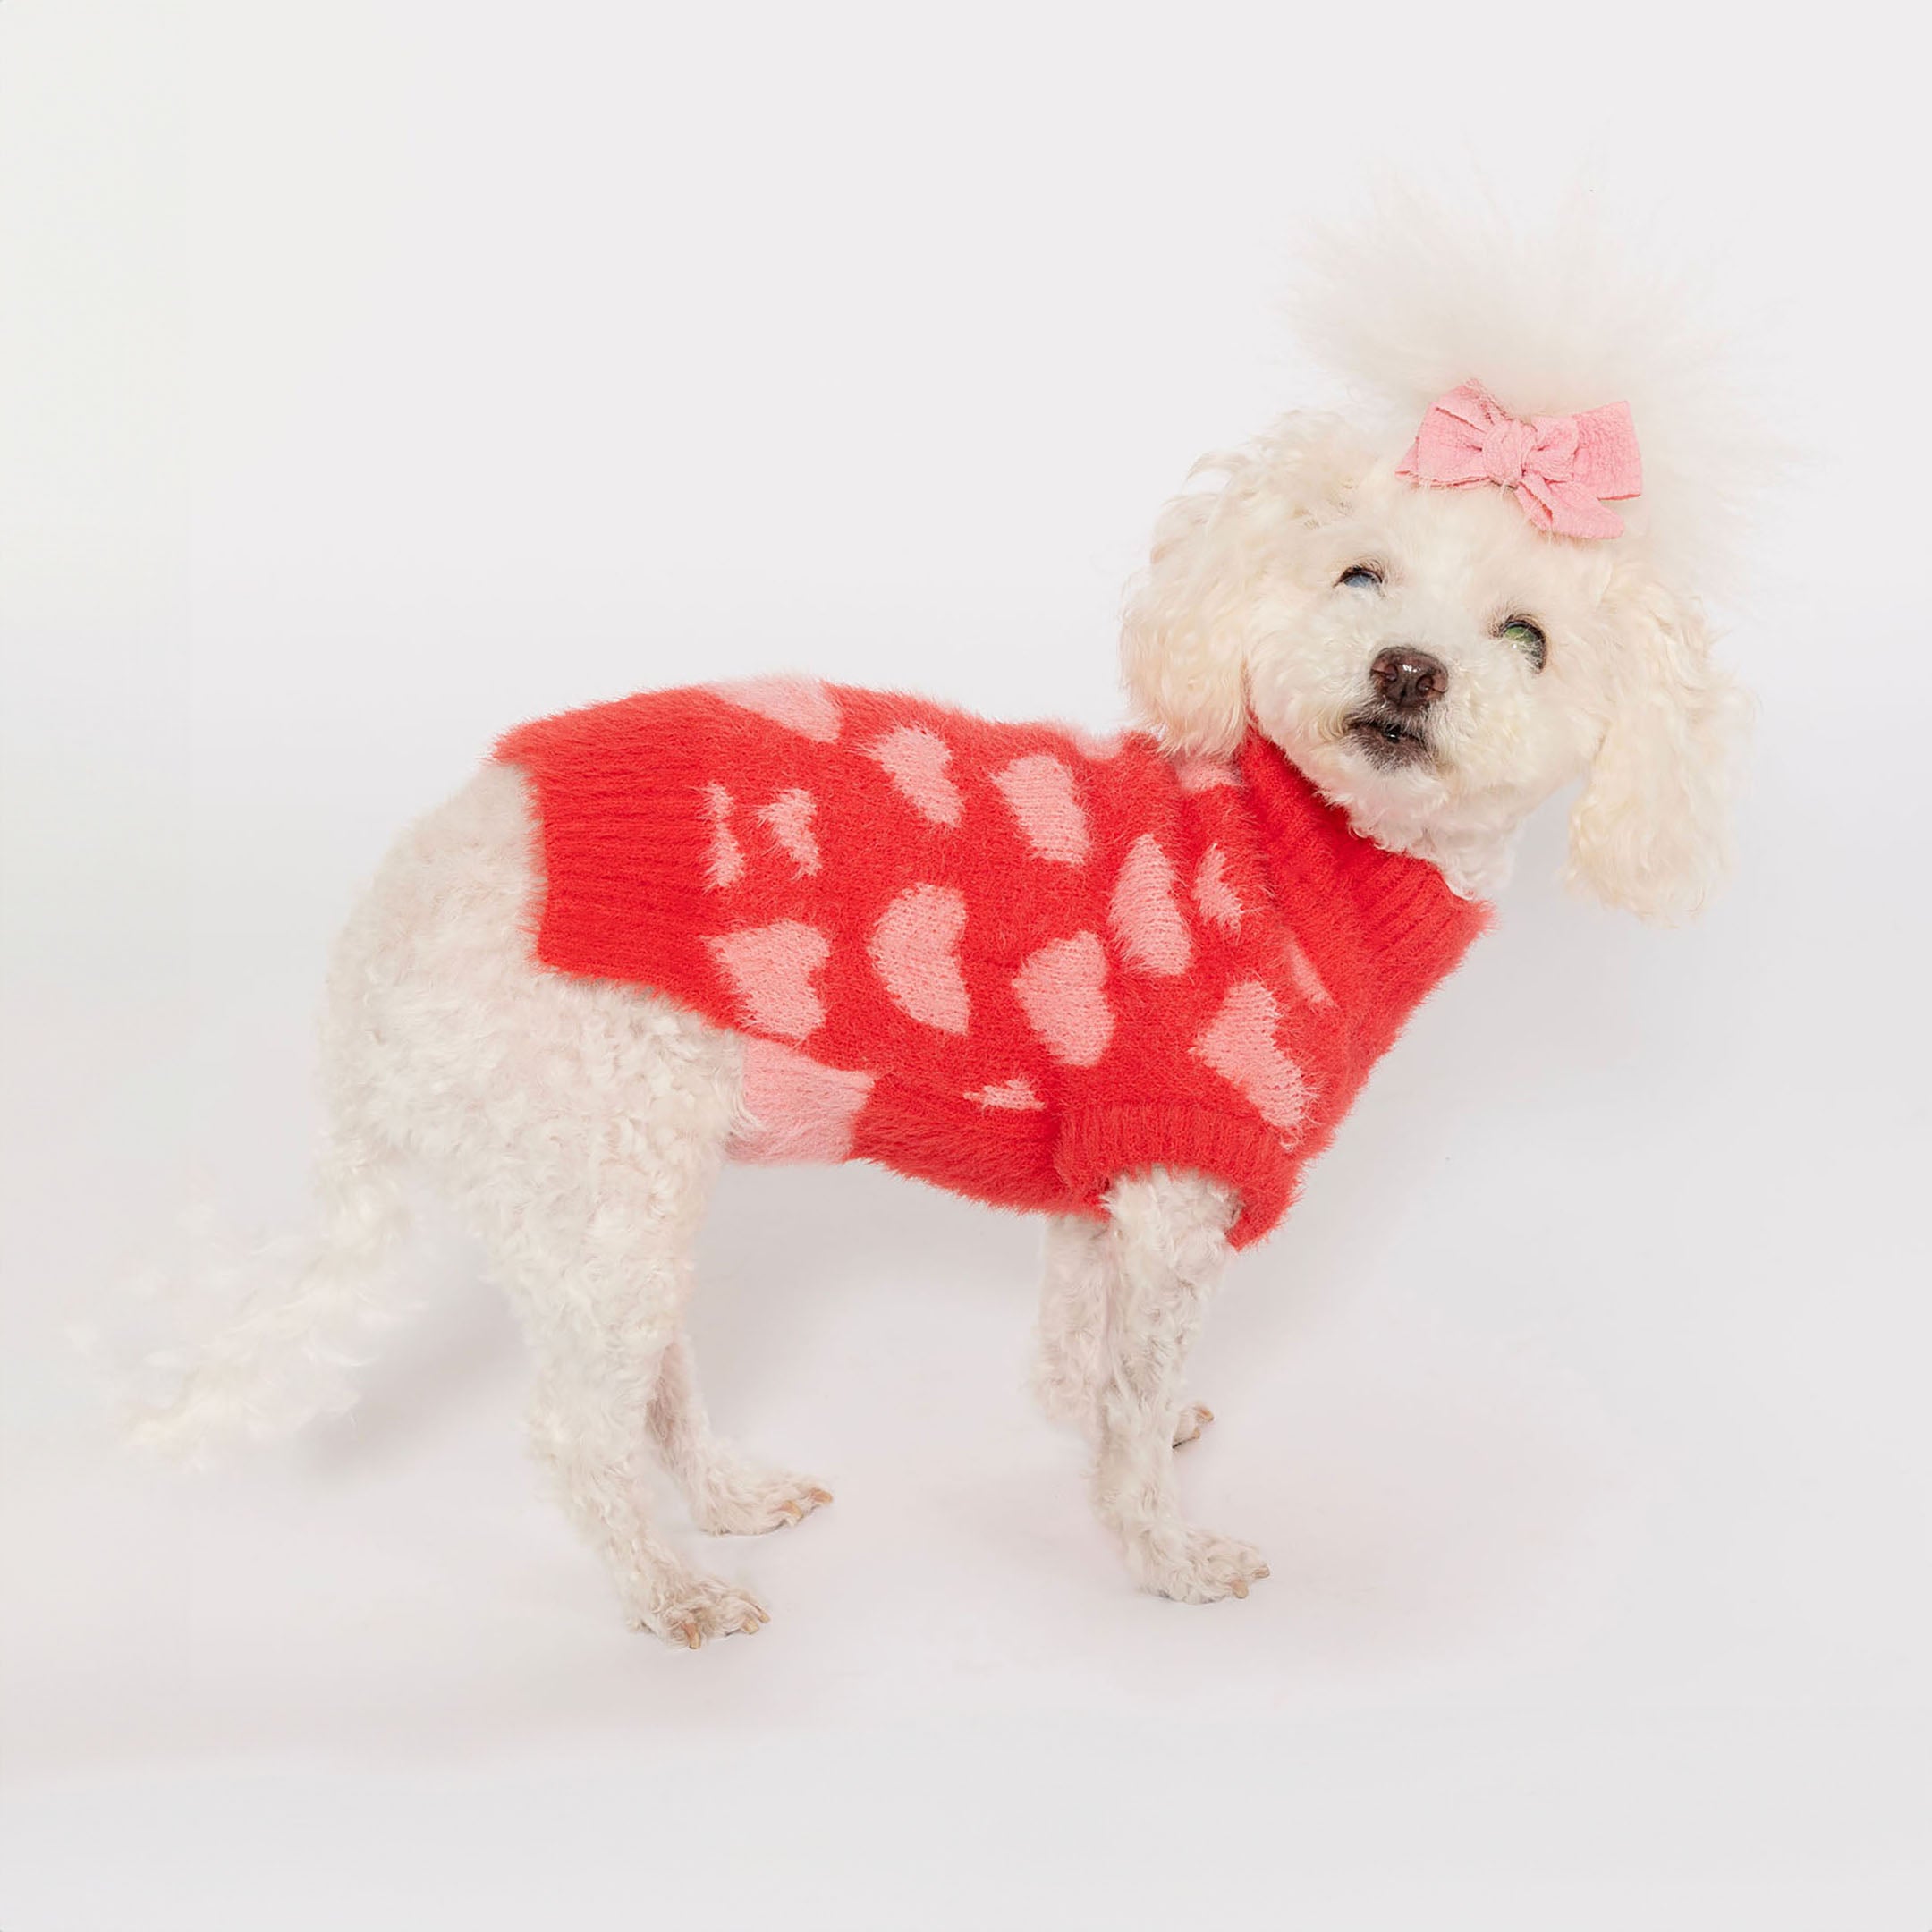 White dog in a red sweater with pink hearts and a cute pink bow on its head, posing against a white background for a charming look.